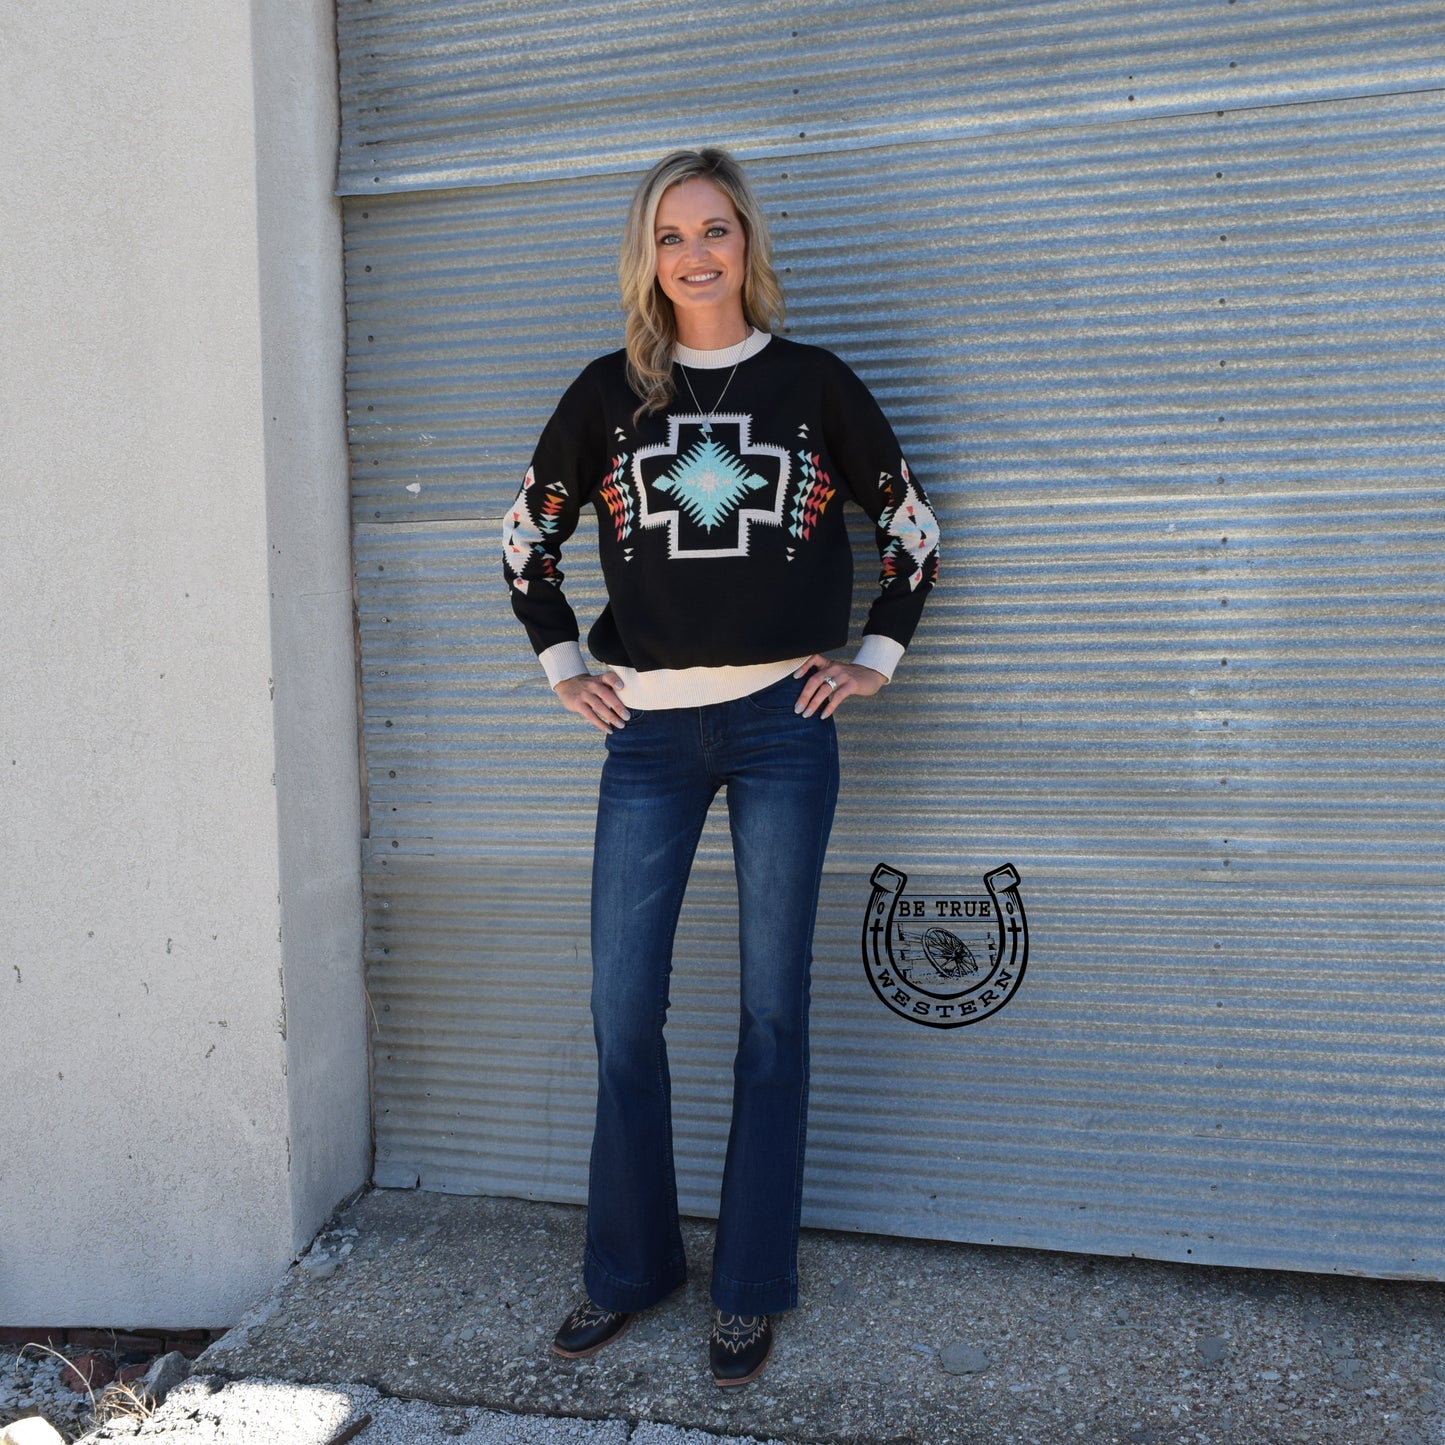 The Happy Trails Aztec Sweater